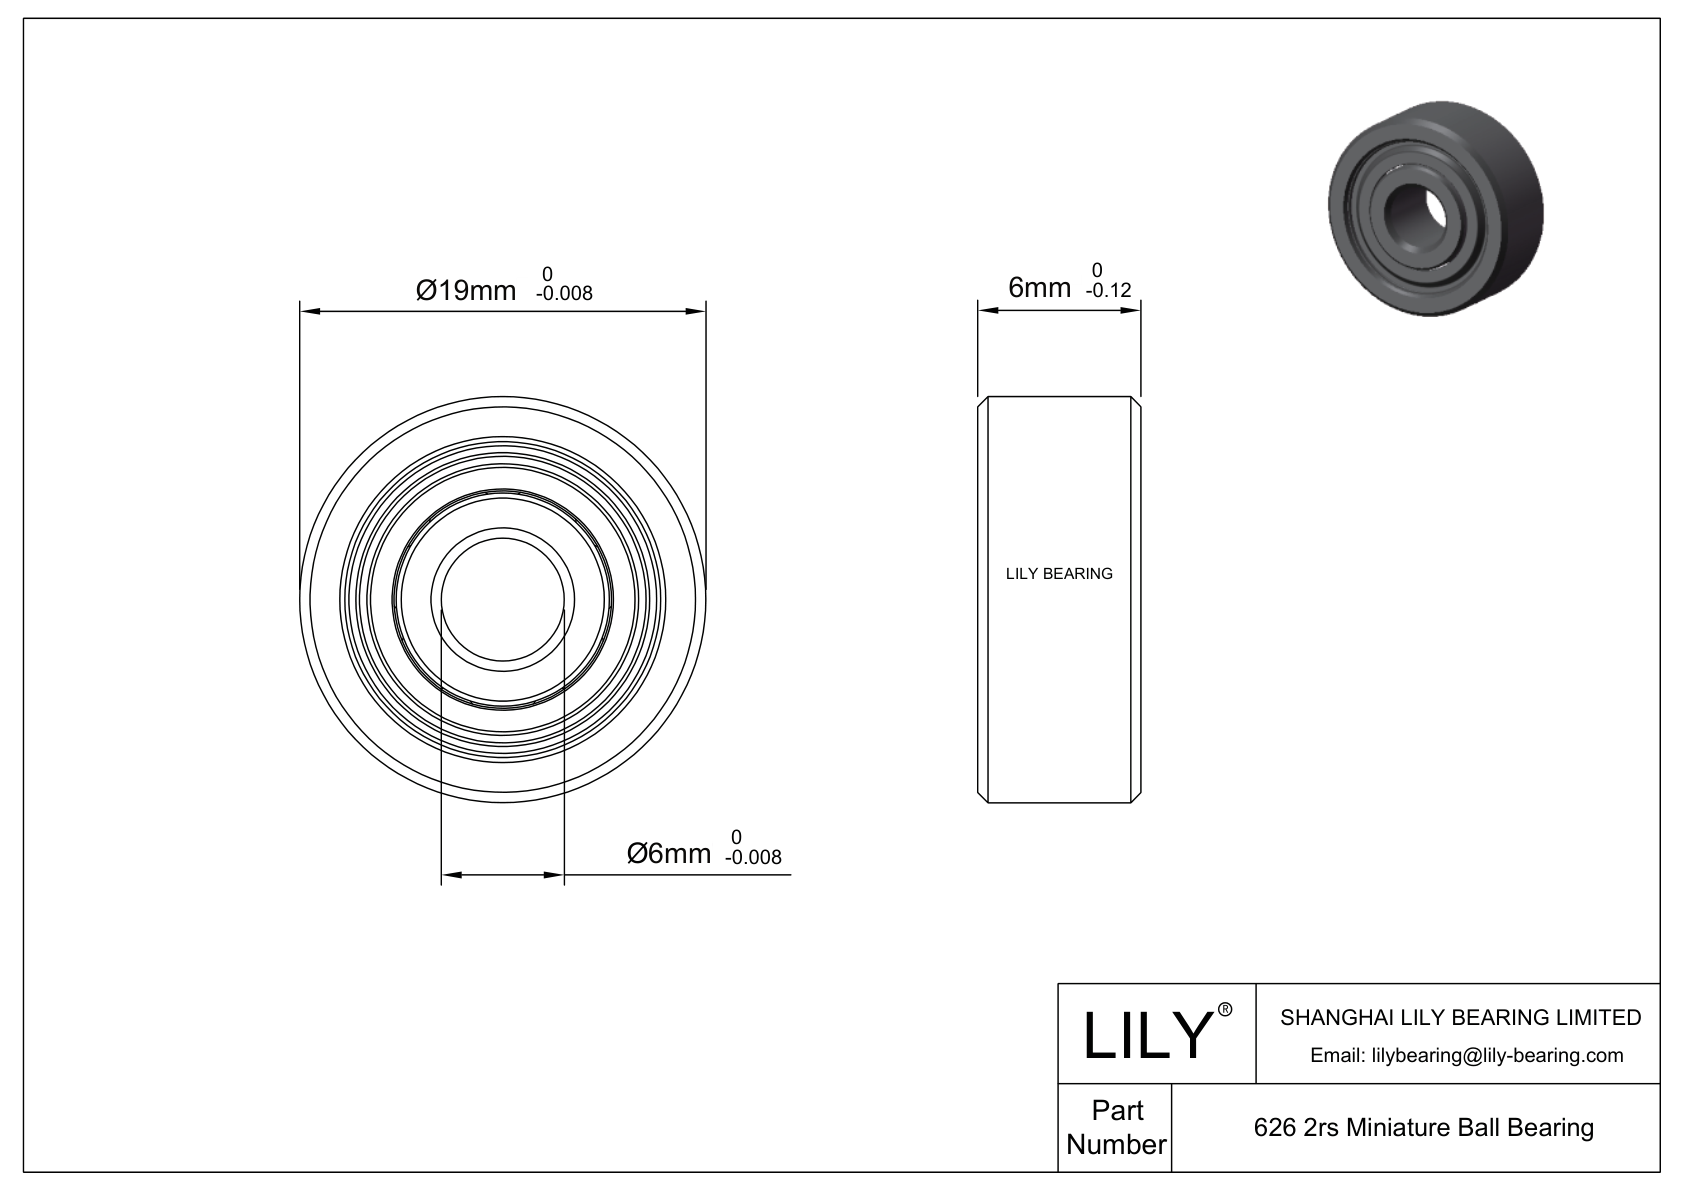 LILY-BS62630-6 POM Coated Bearing cad drawing